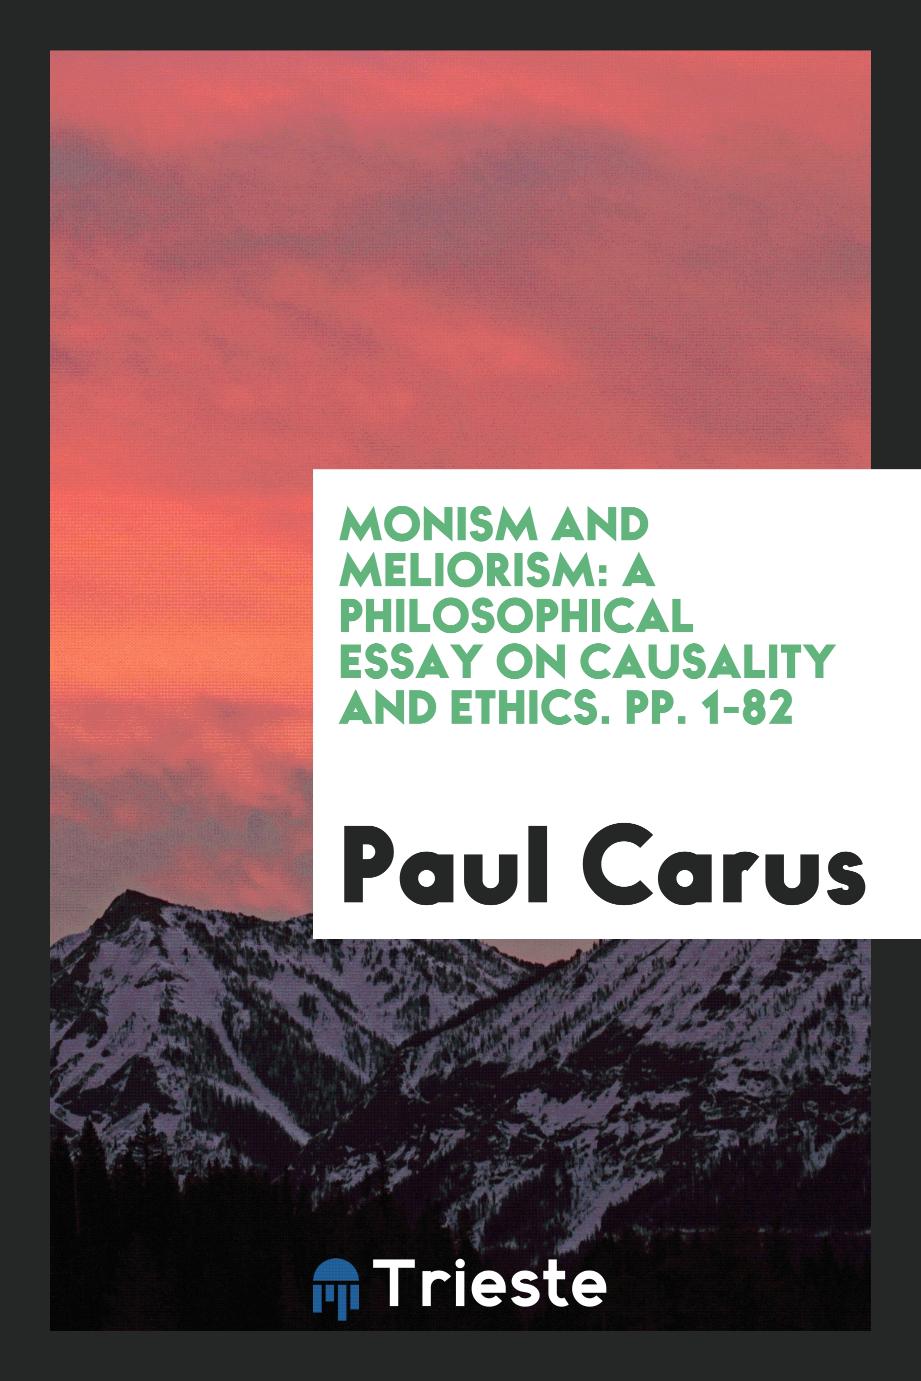 Monism and Meliorism: A Philosophical Essay on Causality and Ethics. pp. 1-82